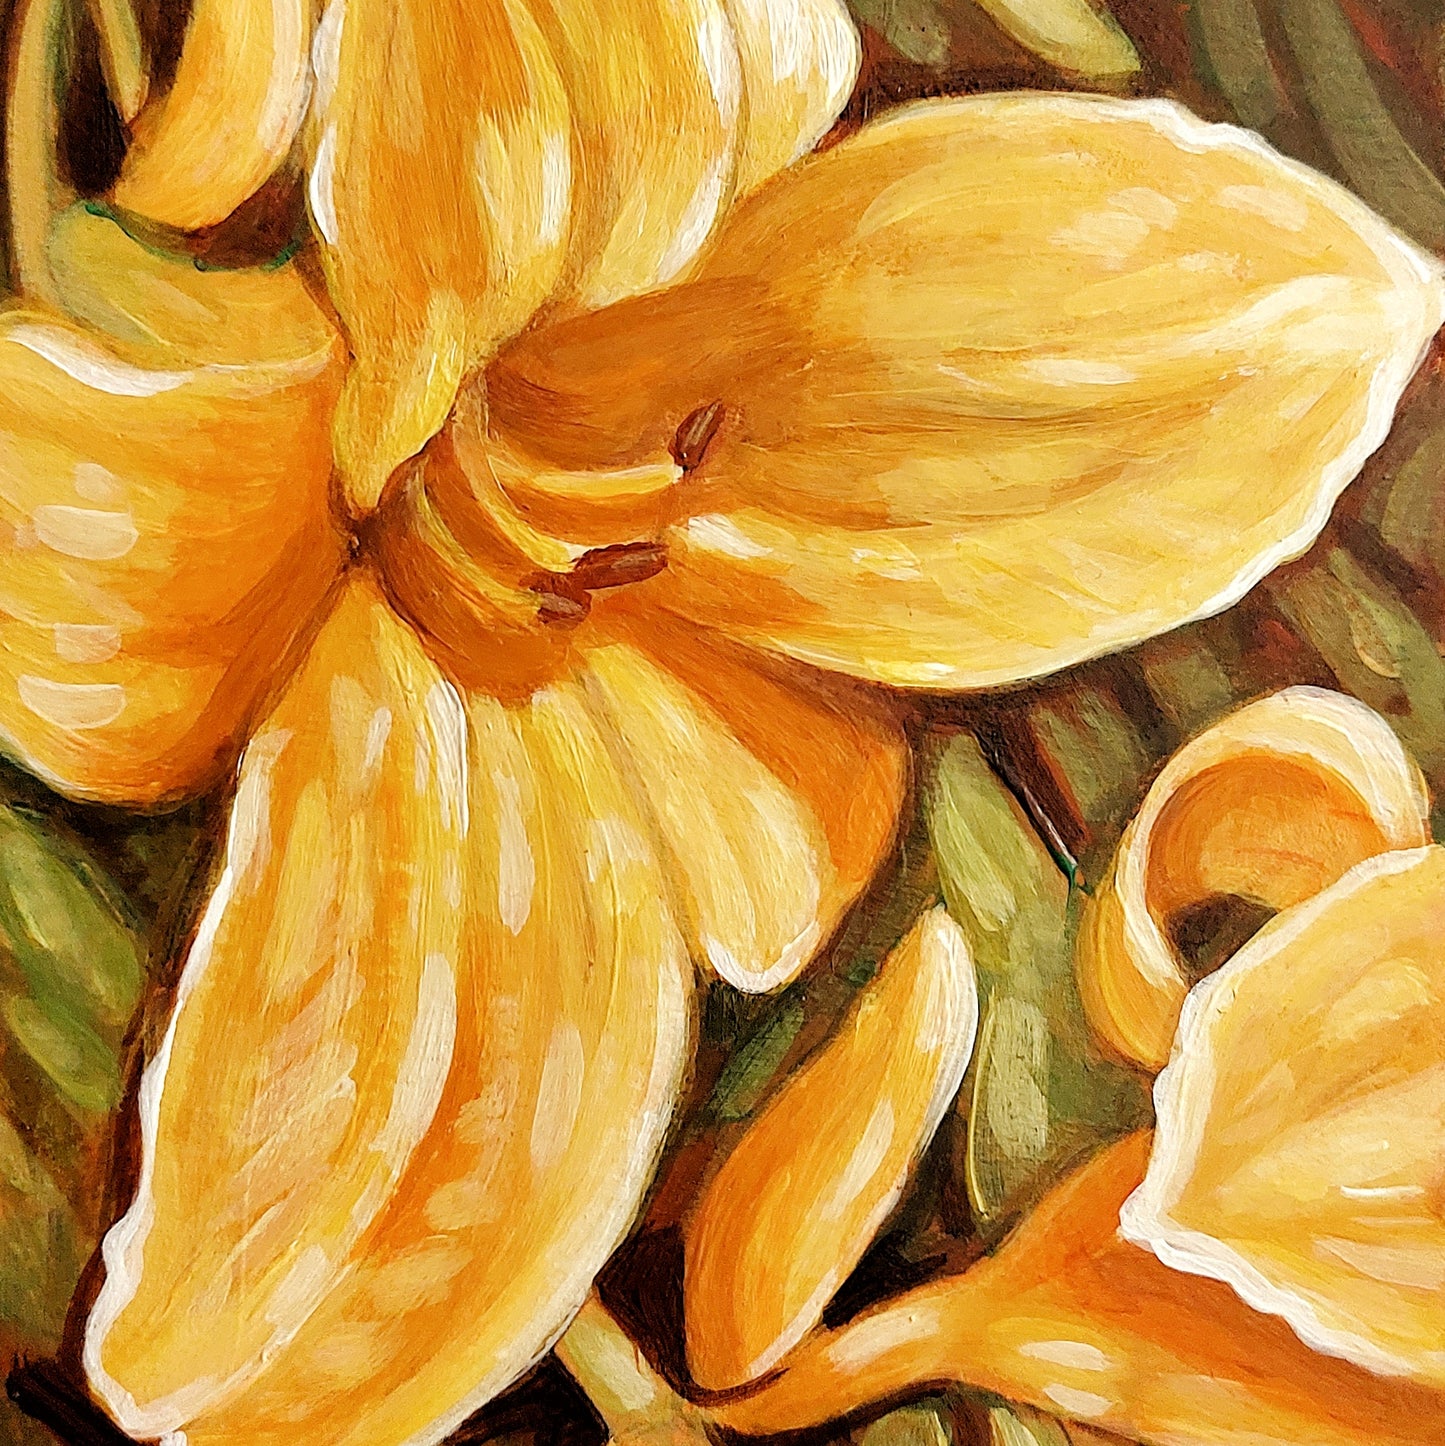 DAY 3 - Daylilies Original Painting a Day